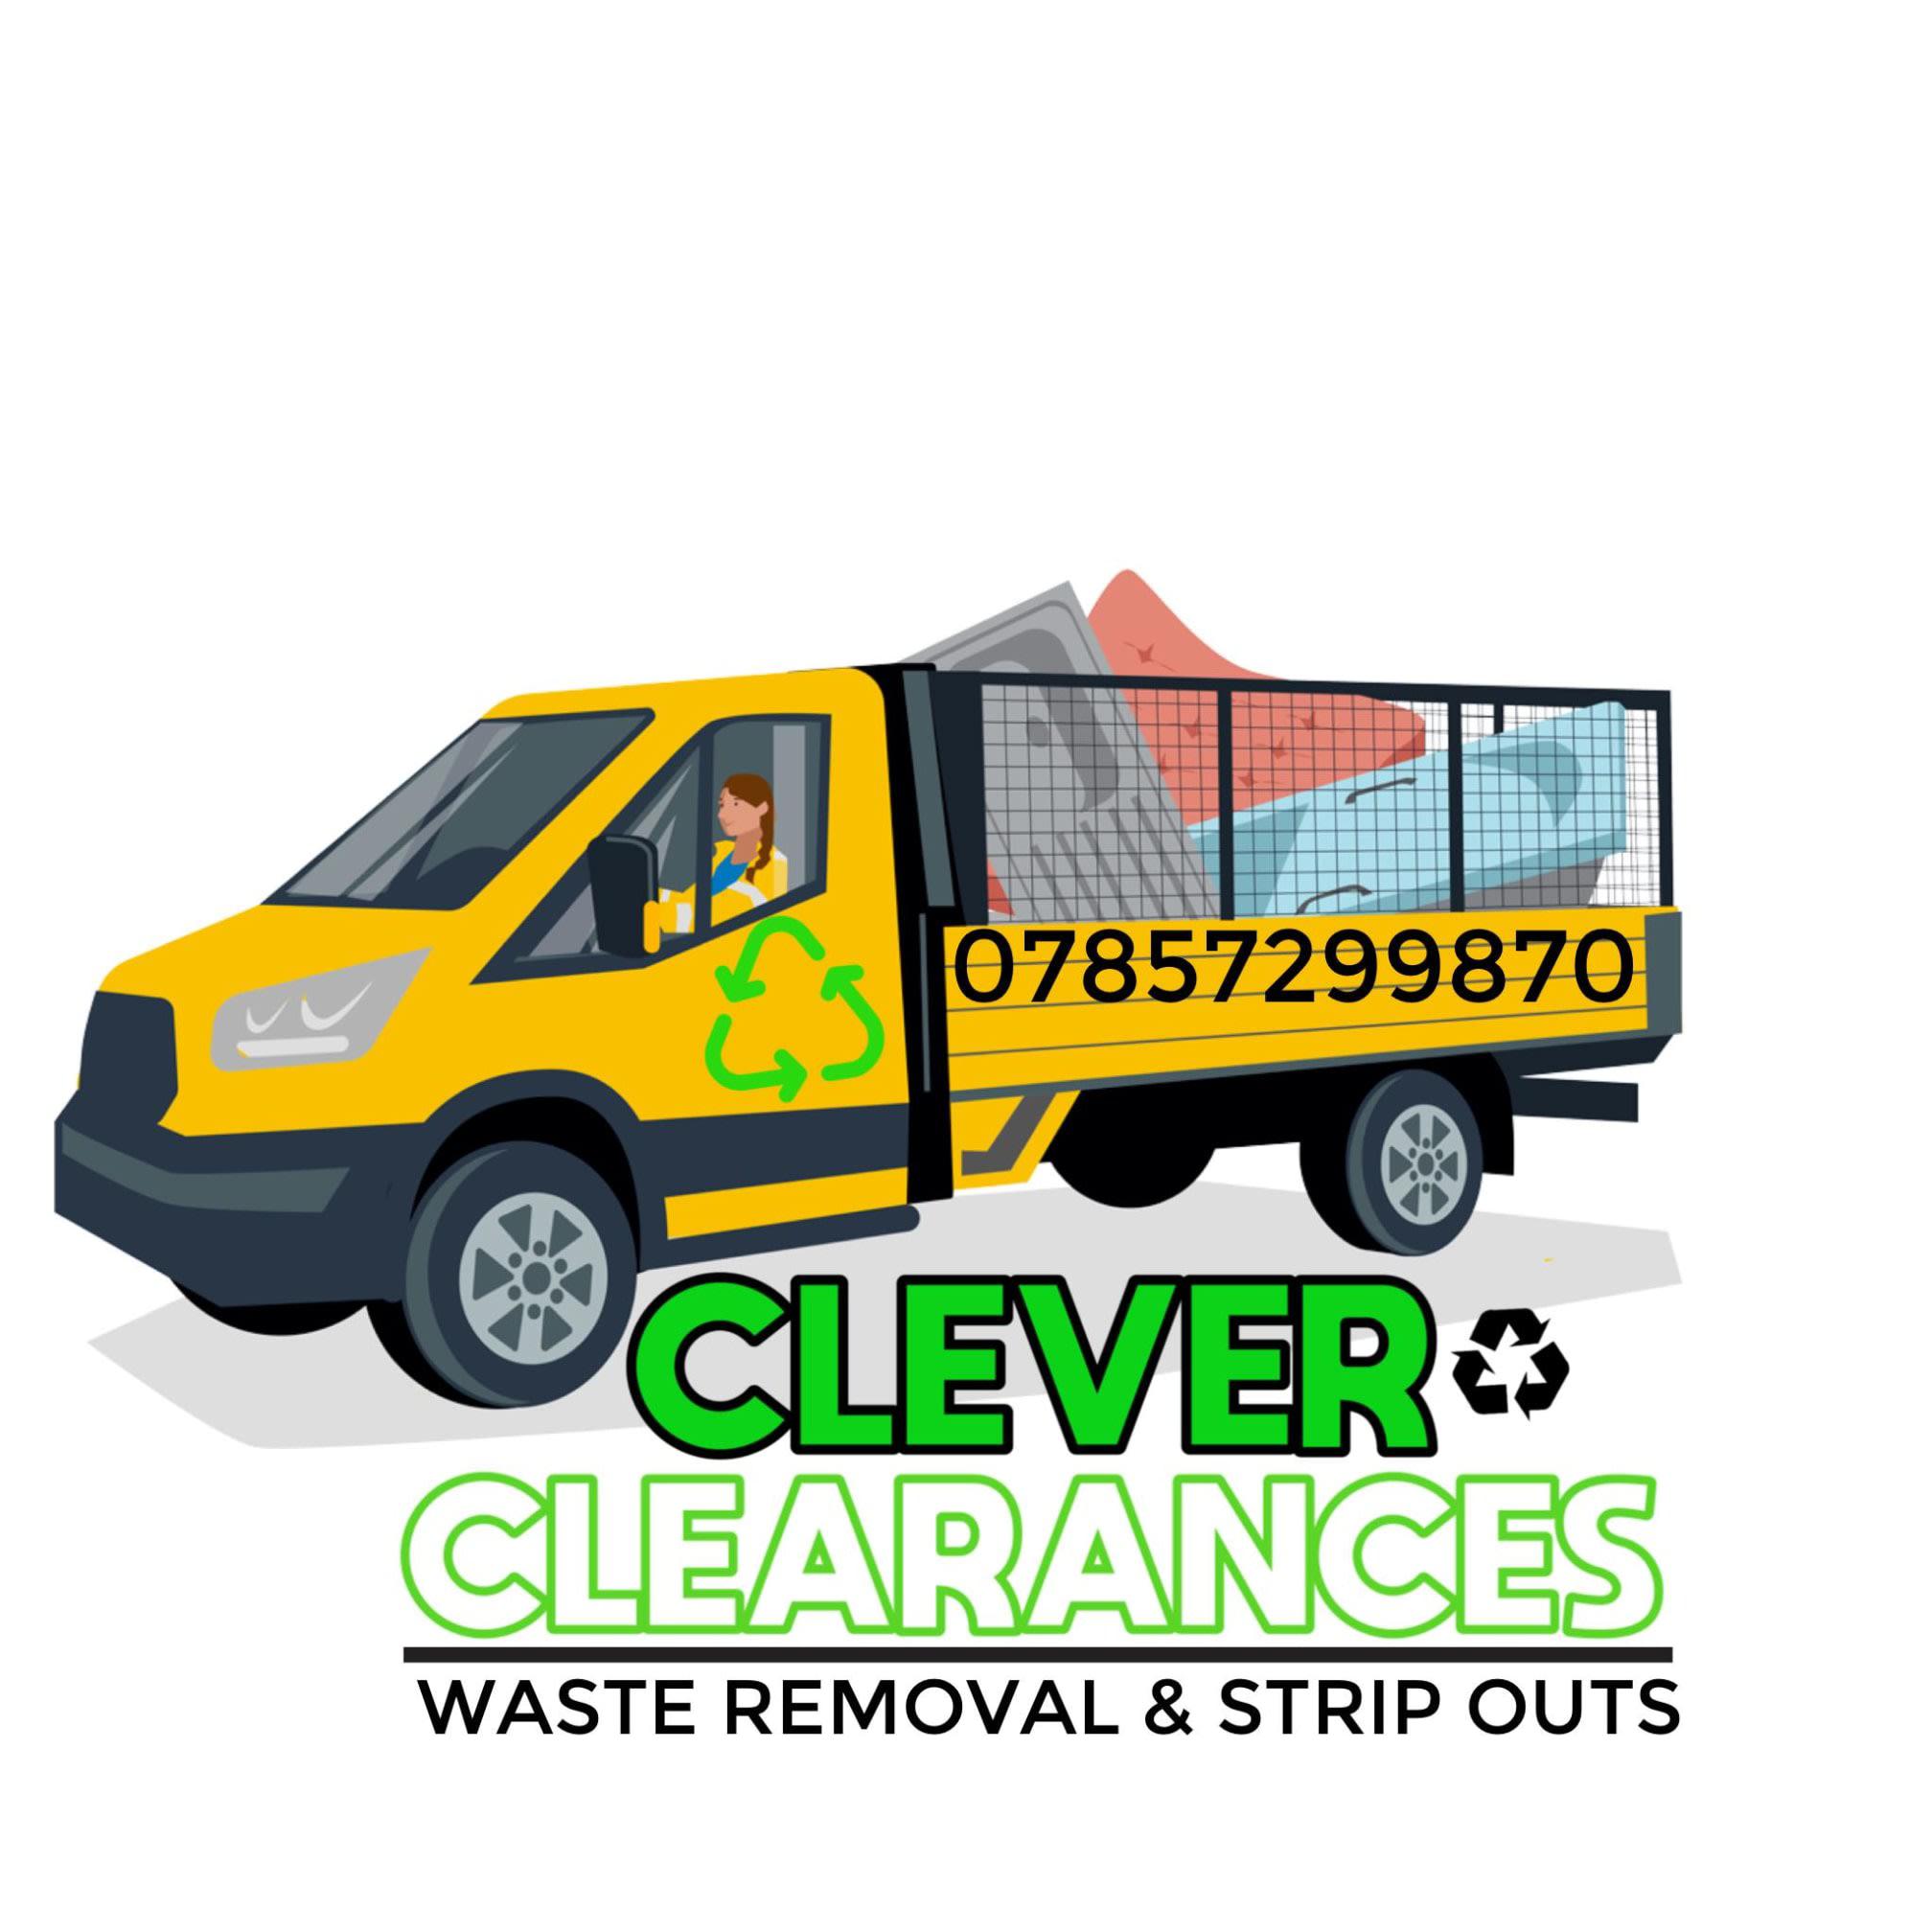 Clever Clearances Waste Removal Birmingham 07857 299870